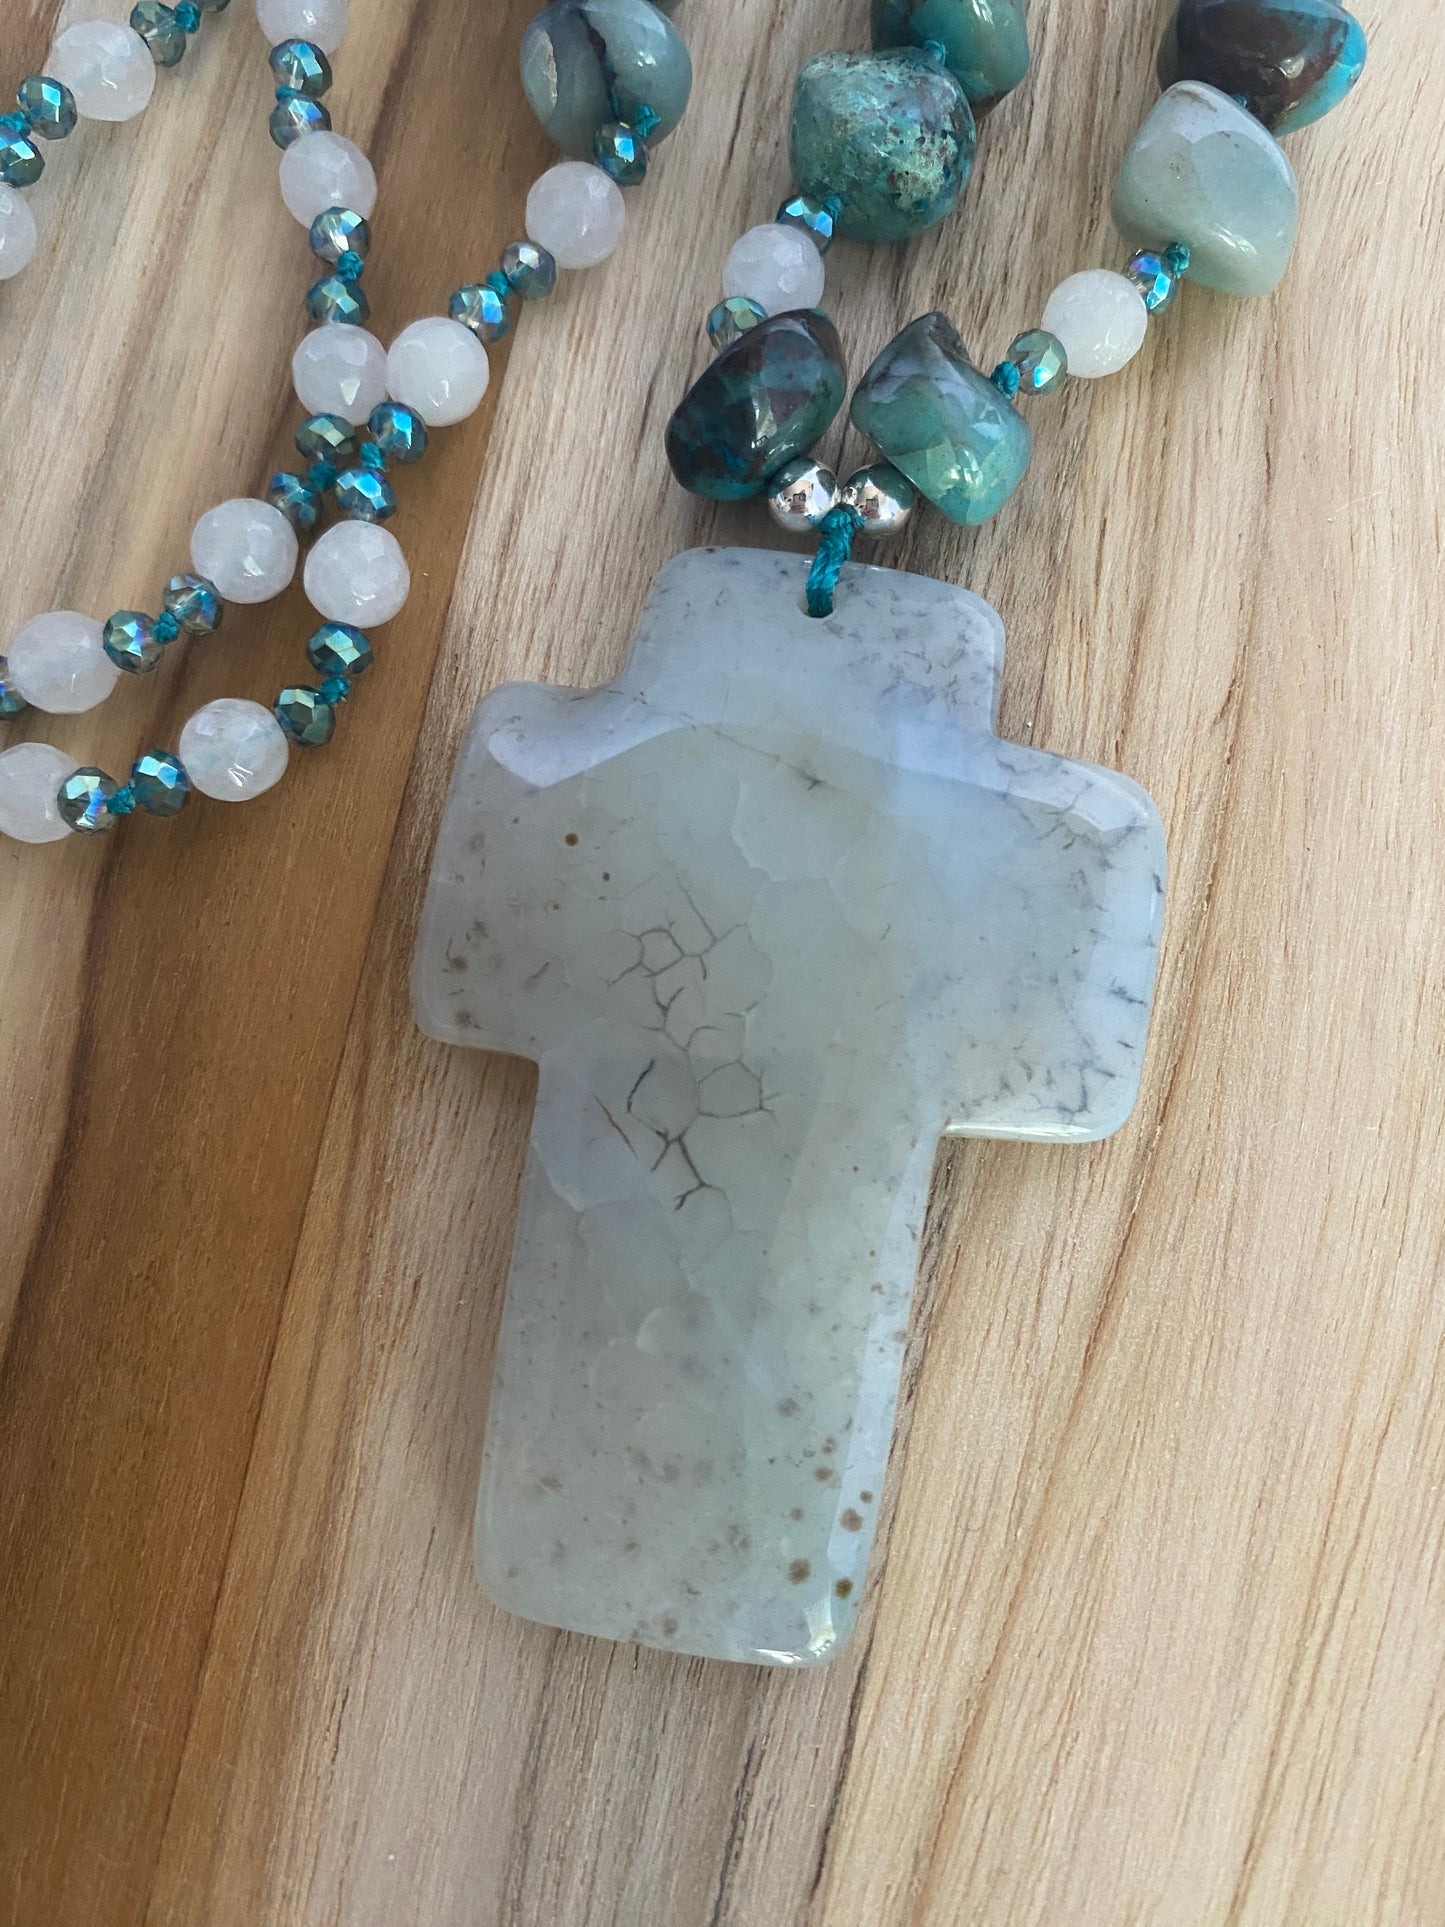 28" Long Light Grey Agate Cross Beaded Necklace with Tumbled Amazonite, Agate & Crystal Beads